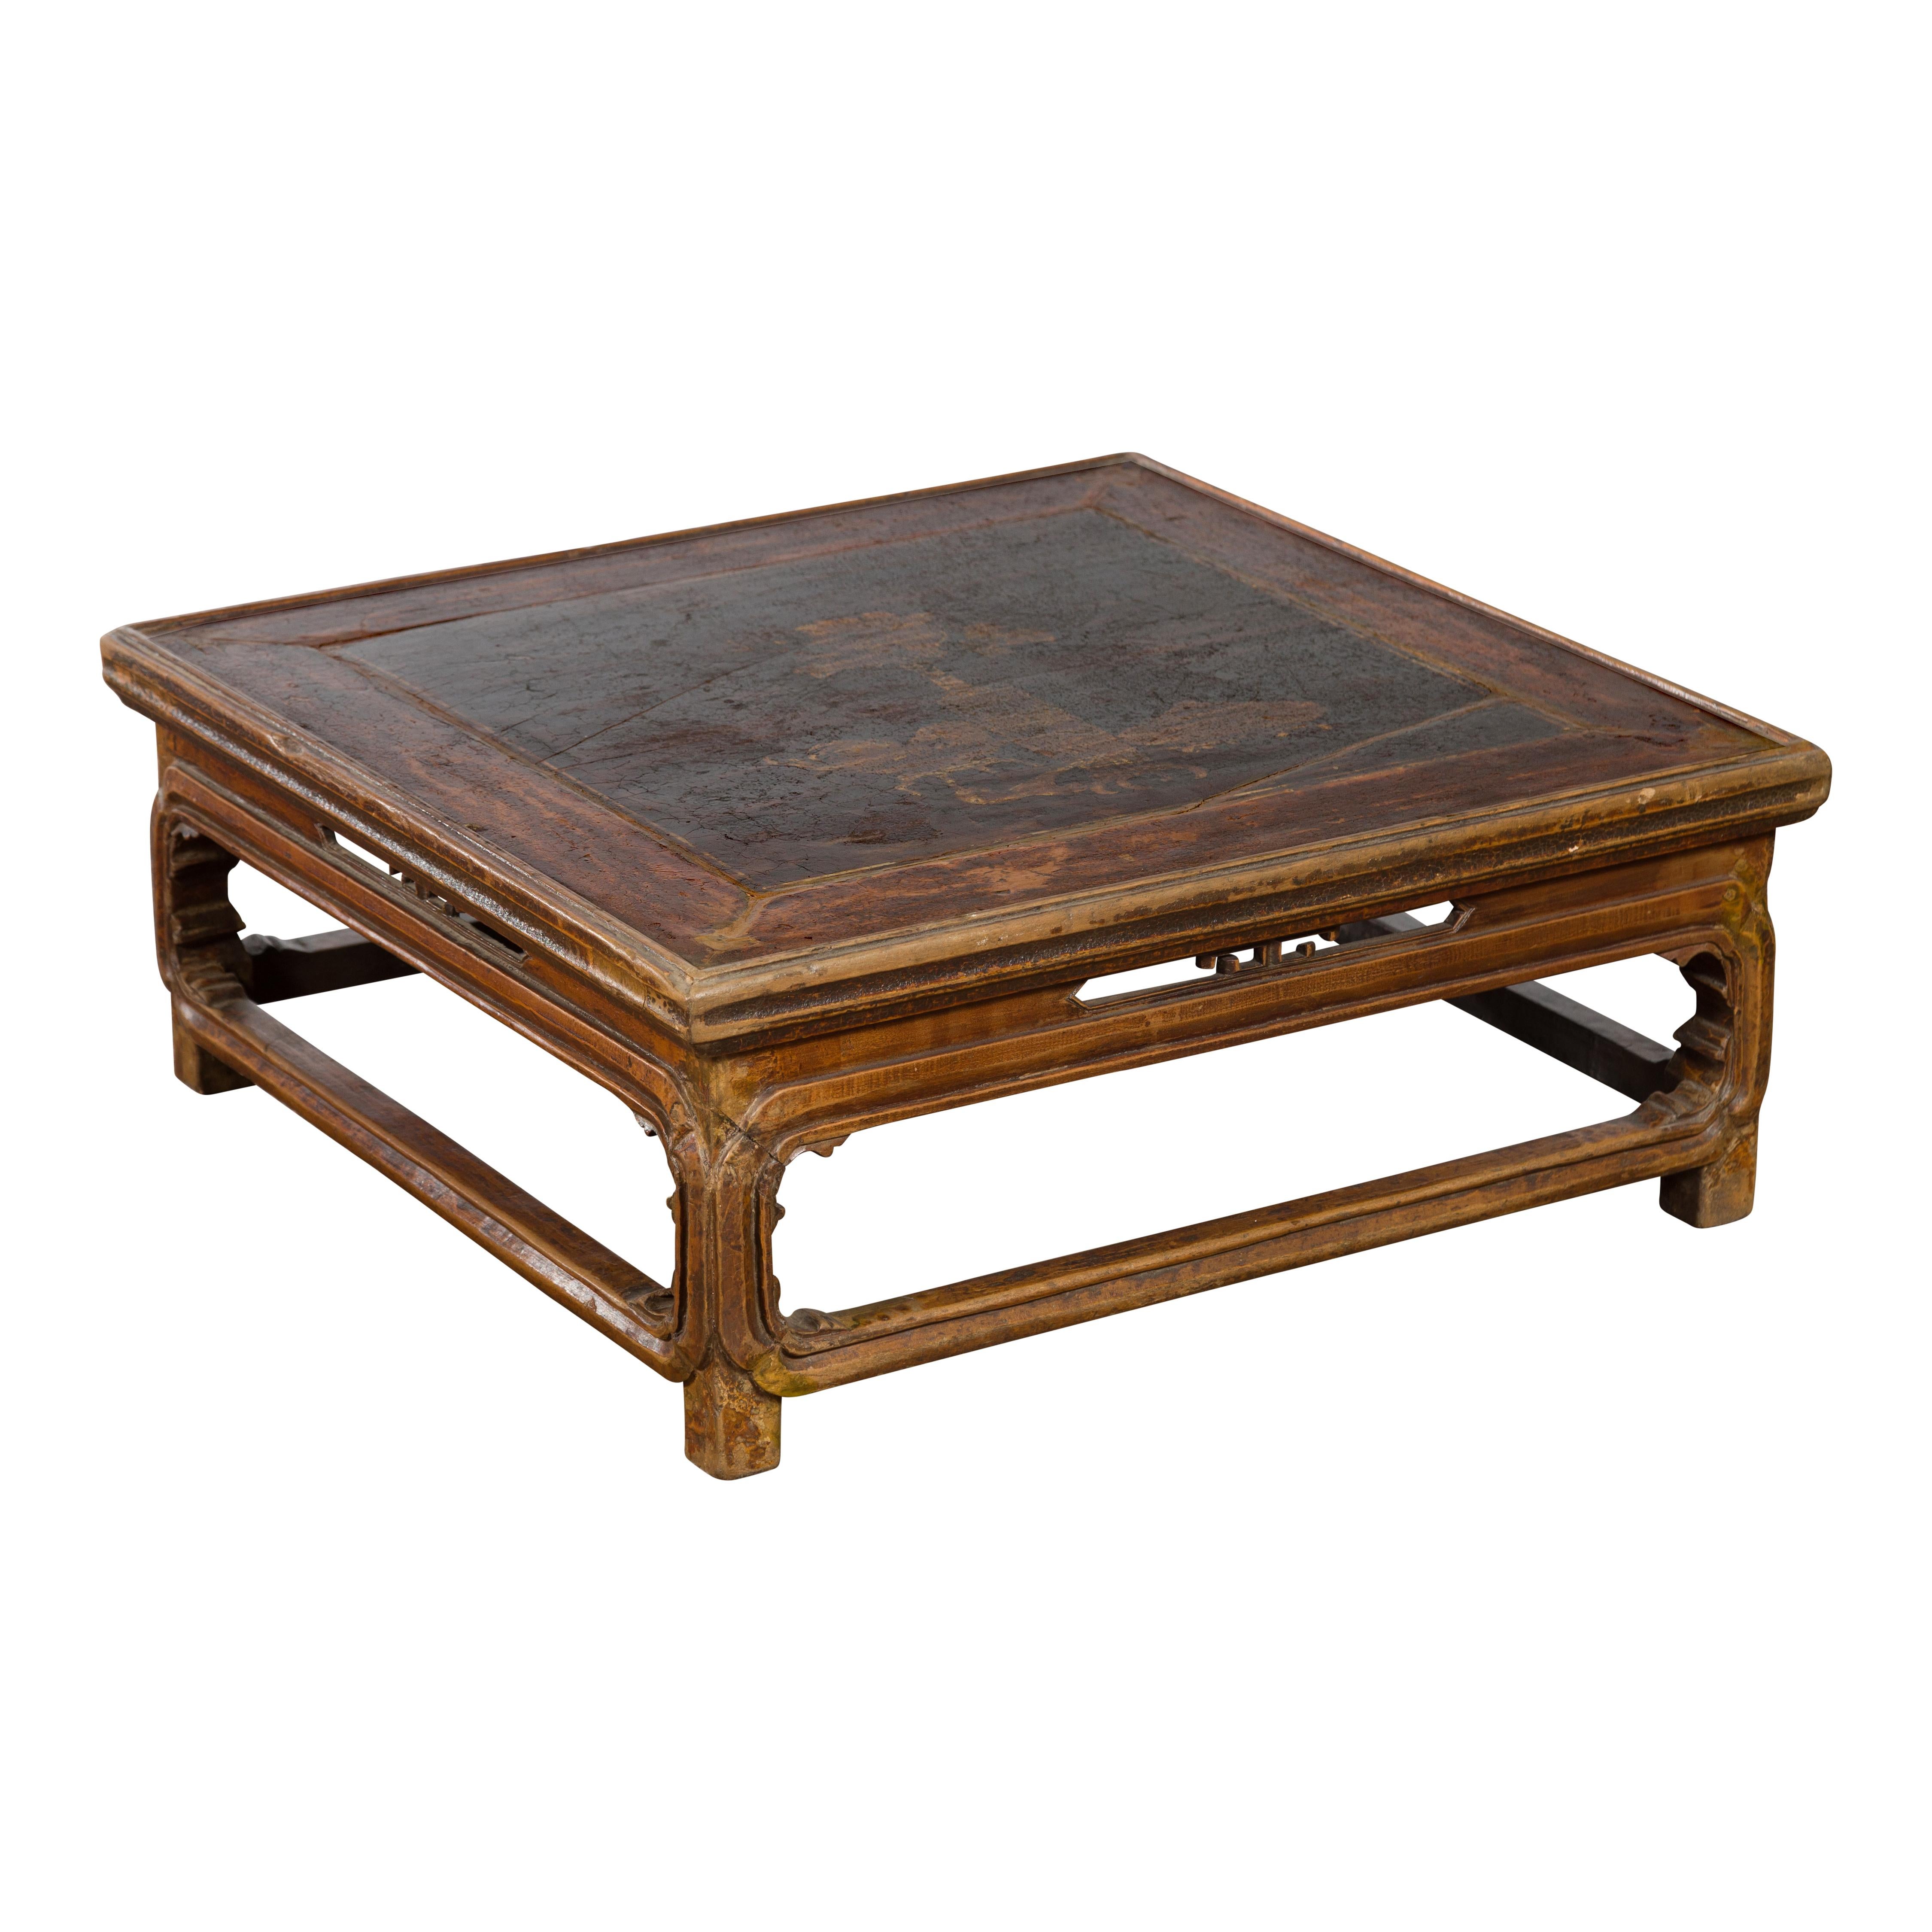 Qing Dynasty 19th Century Chinese Low Kang Coffee Table with Painted Décor